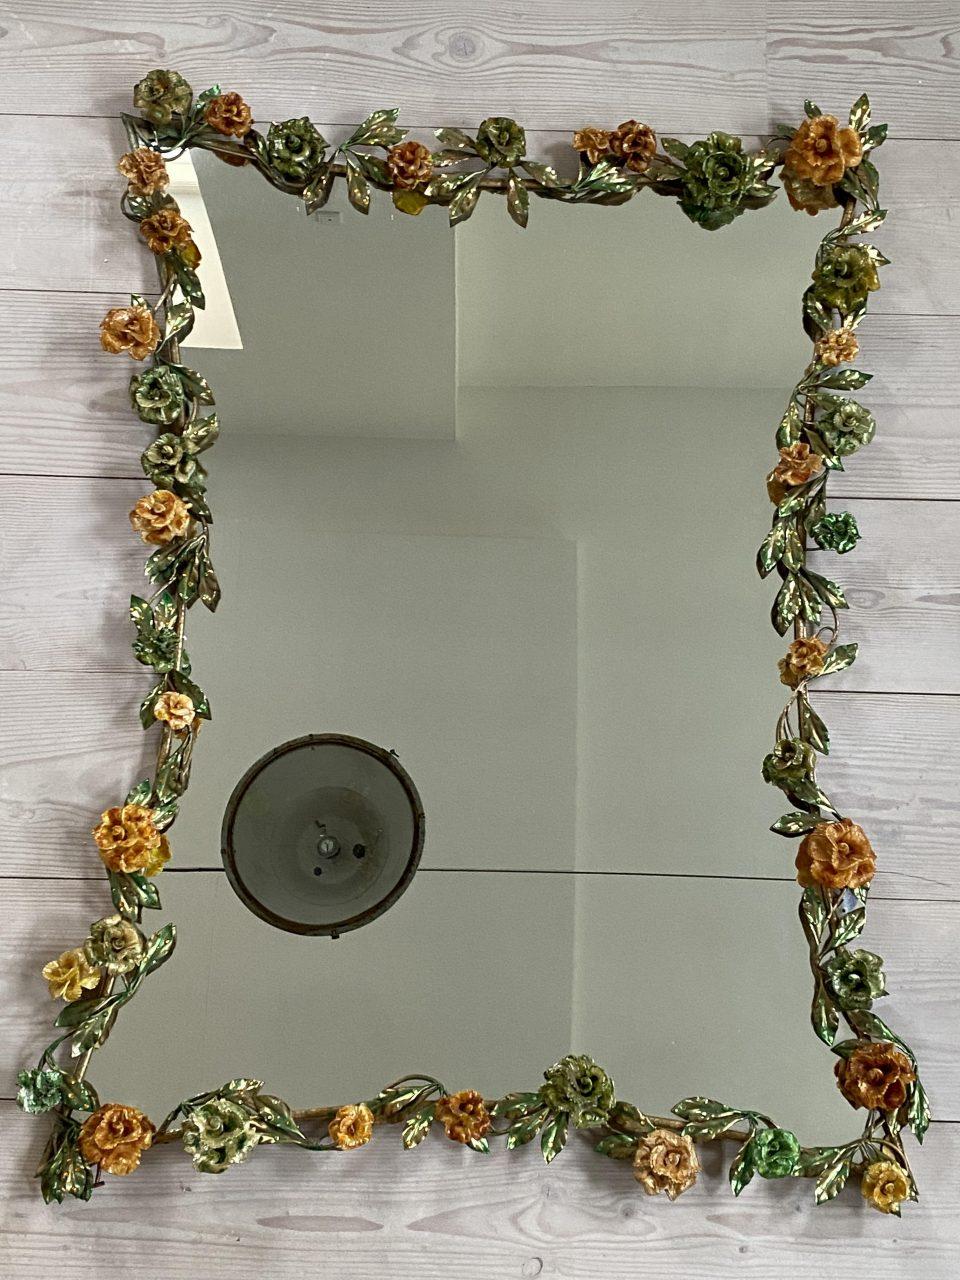 Awe inspiring and seldom found large Murano mirror, from circa 1970. Garlands of luscious flowers adorn it in colourful Venetian glass with stunning and charming mouth-blown glass flowers and green leaves along the frame.

An extremely imaginative